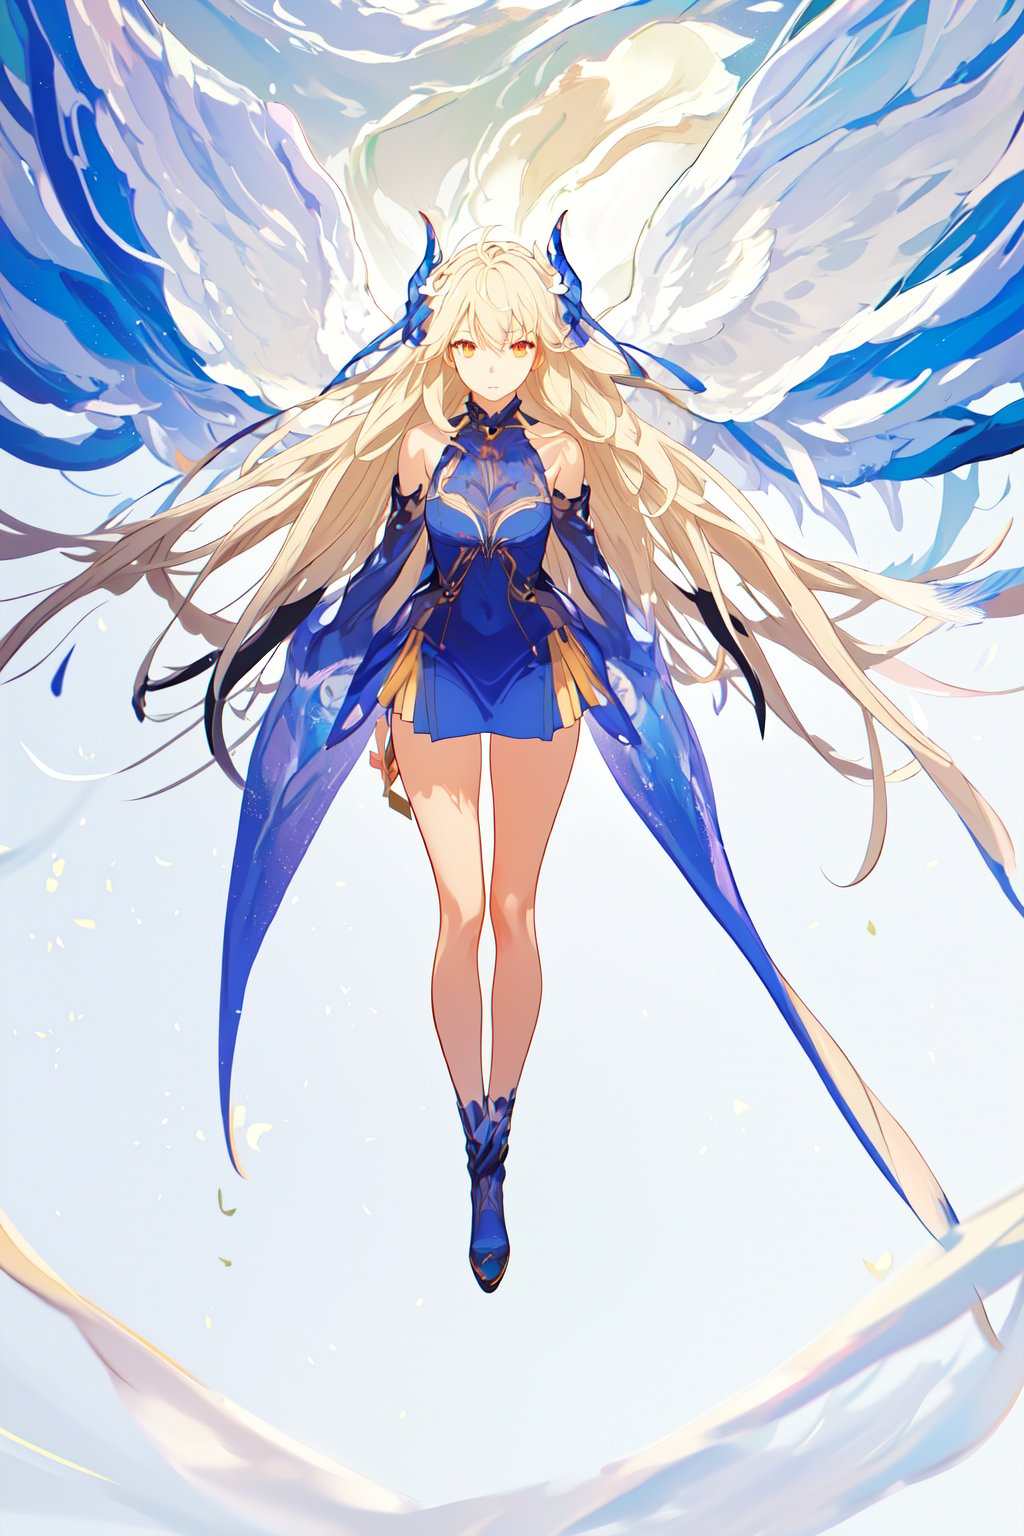 (HAIR AS WING:1.4), (masterpiece:1.2), (best quality), 8K wallpaper, (highres), (ultra detailed:1.2), sharp lines,

(long hair:1.4), (hair like wings:1.3), (wings parallel to head:1.2), (flowing hair:1.1), (anime style:1.2),

(detailed hair:1.2), (hair texture:1.1), (hair highlights:1.1), (hair shadows:1.1), (hair color:1.1), (hair movement:1.1),

(solo:1.1), (full body:1.1), (female:1.1), (looking at viewer:1.1), (calm expression:1.1), (soft skin:1.1),

(fantasy background:1.1), (glowing background:1.1), (light source:1.1), (soft light:1.1), (dynamic composition:1.1), (detailed background:1.1),